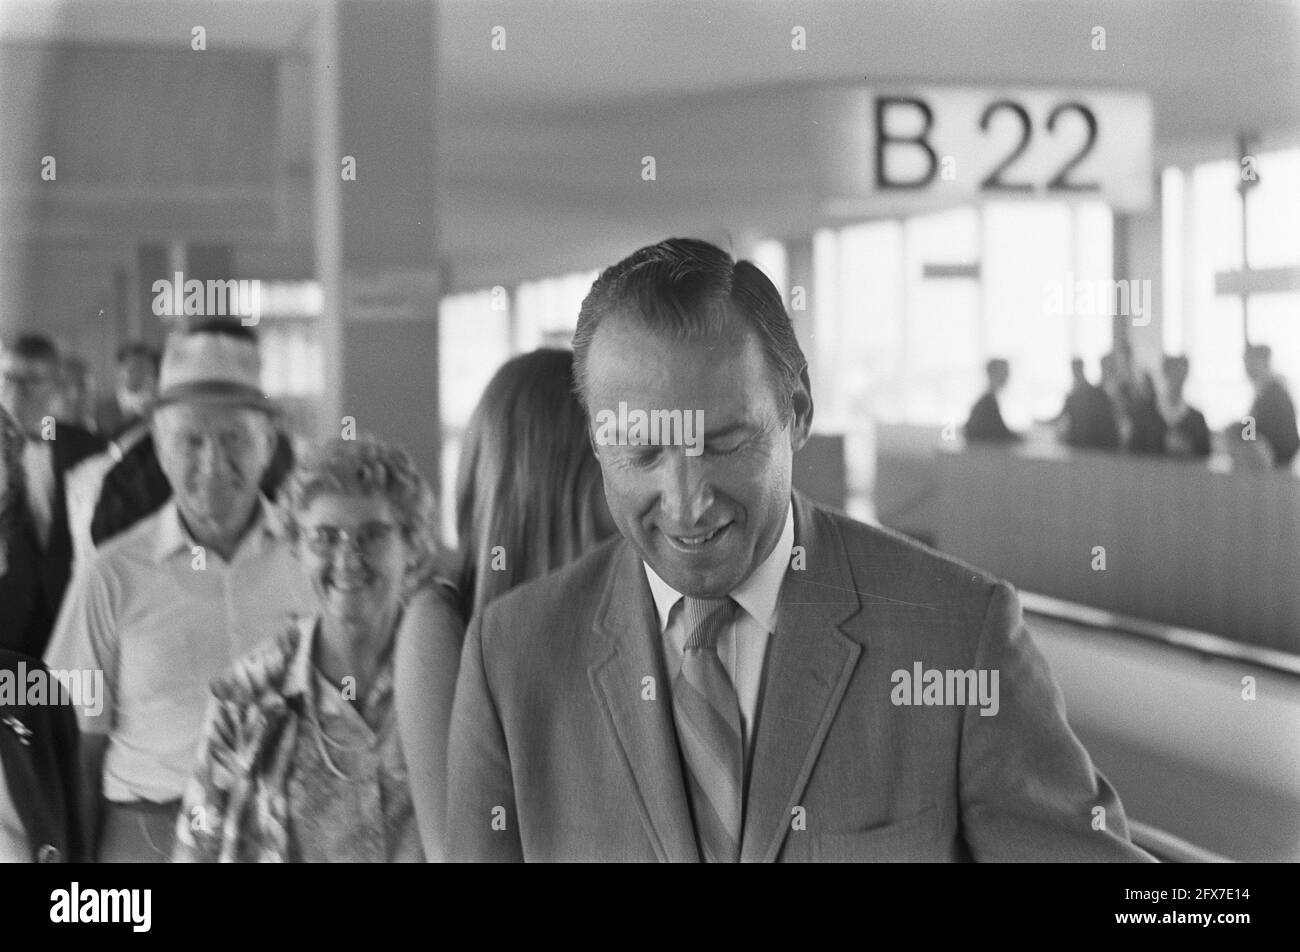 James Lovell (head) at Schiphol Airport, August 21, 1969, astronauts, The Netherlands, 20th century press agency photo, news to remember, documentary, historic photography 1945-1990, visual stories, human history of the Twentieth Century, capturing moments in time Stock Photo